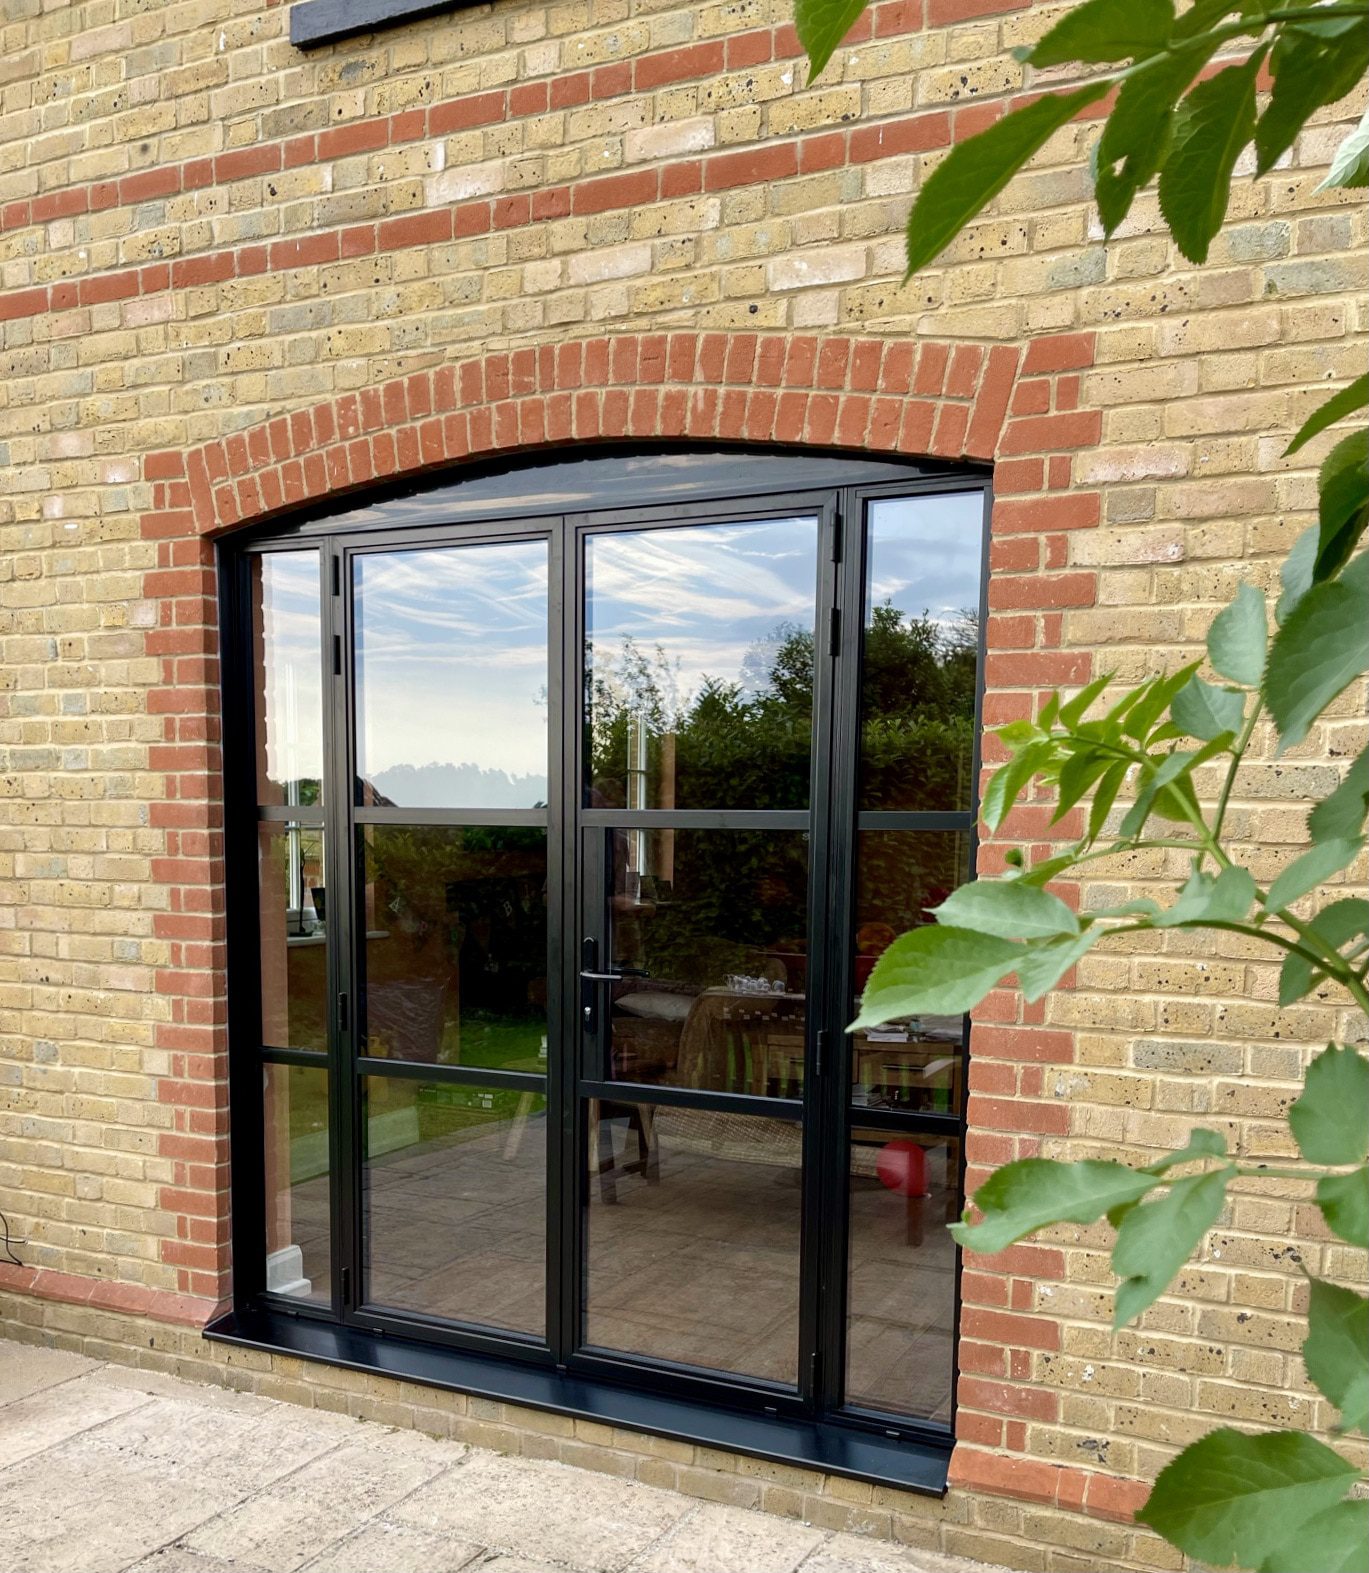 Crittall style doors in Kent house with feature arch above